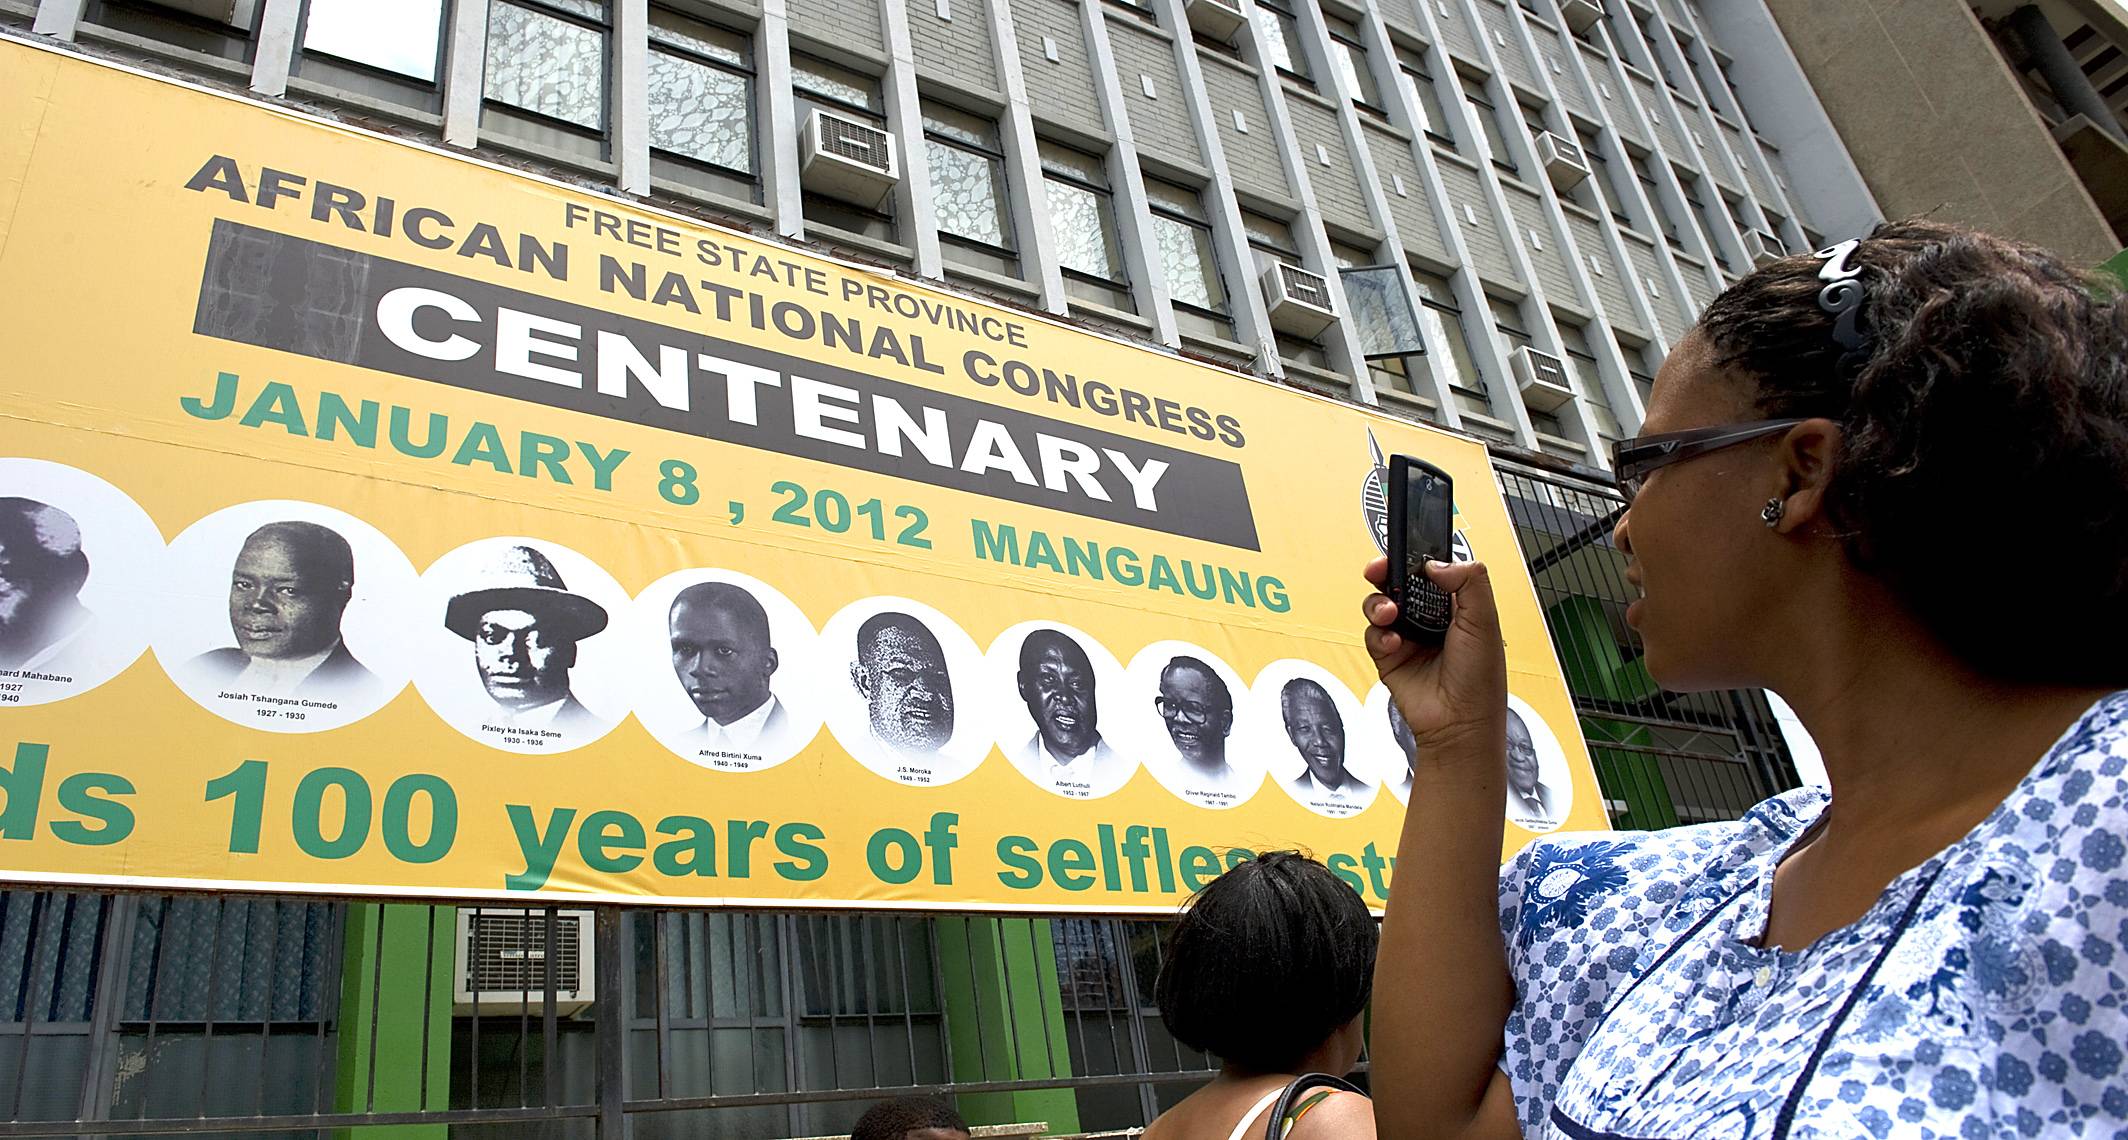 1912 – A Revolution - Image 1 from ANC at 100: A Timeline of the Struggle | BET